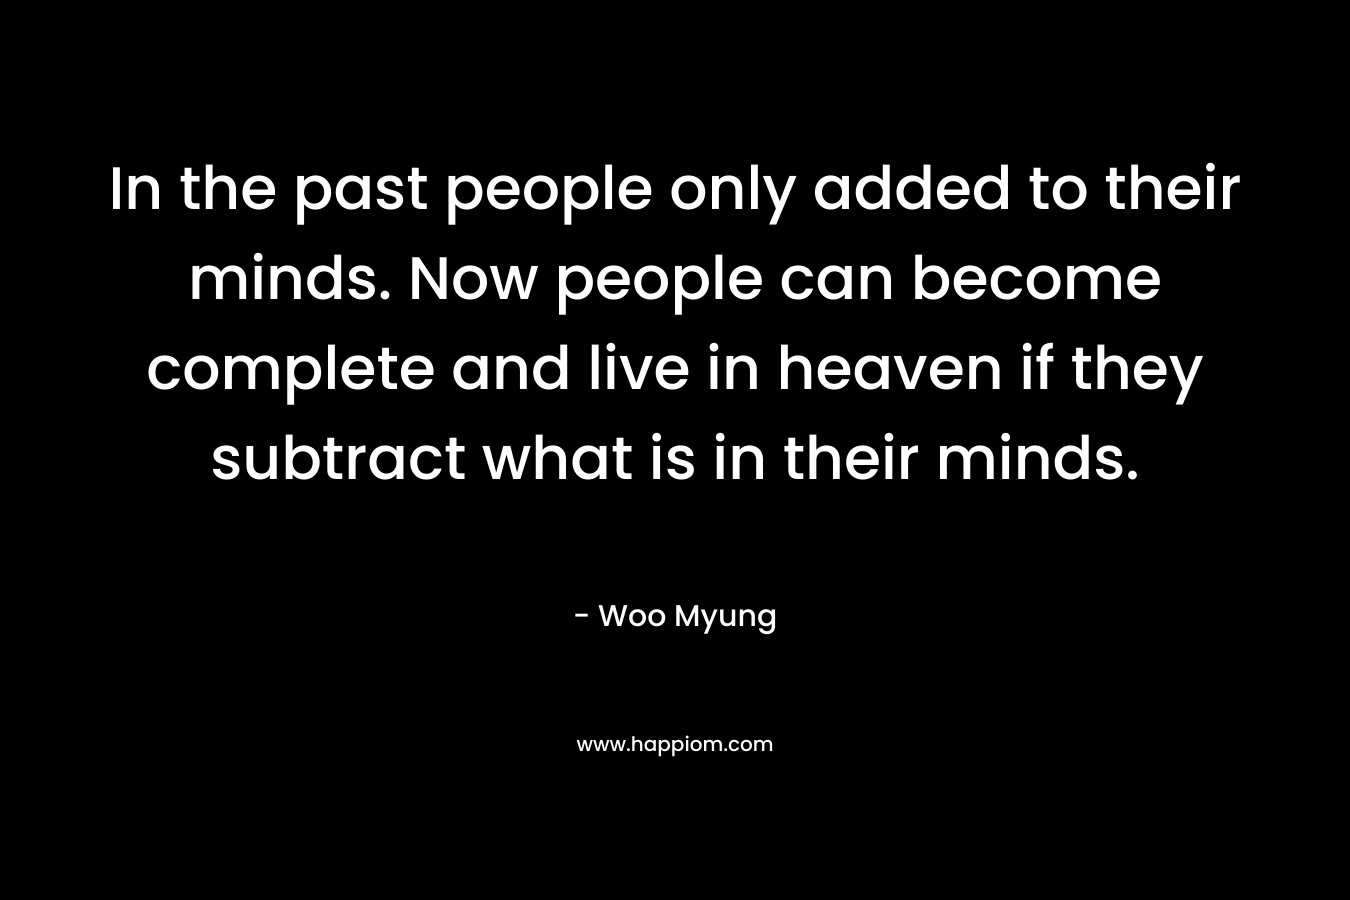 In the past people only added to their minds. Now people can become complete and live in heaven if they subtract what is in their minds. – Woo Myung